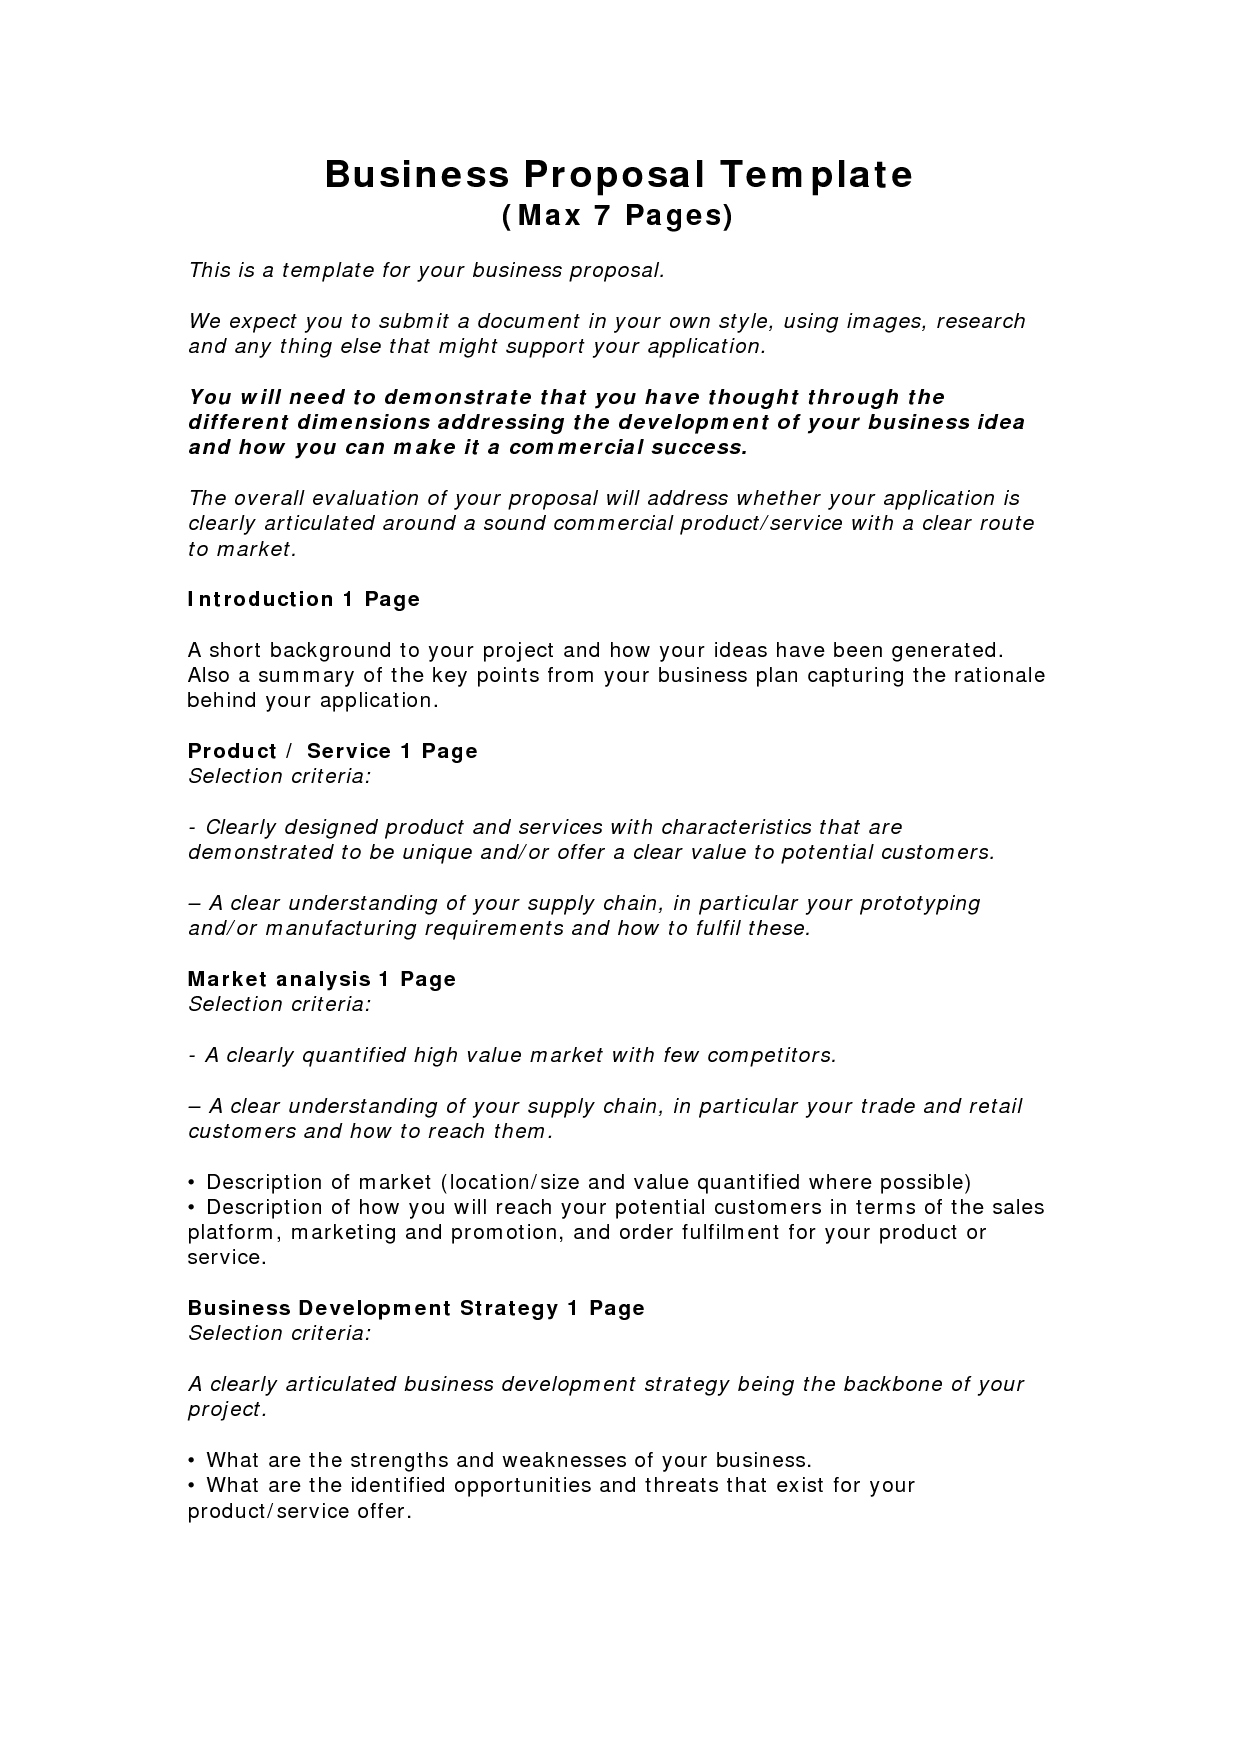 Business Proposal Templates Examples | Business Proposal Template 